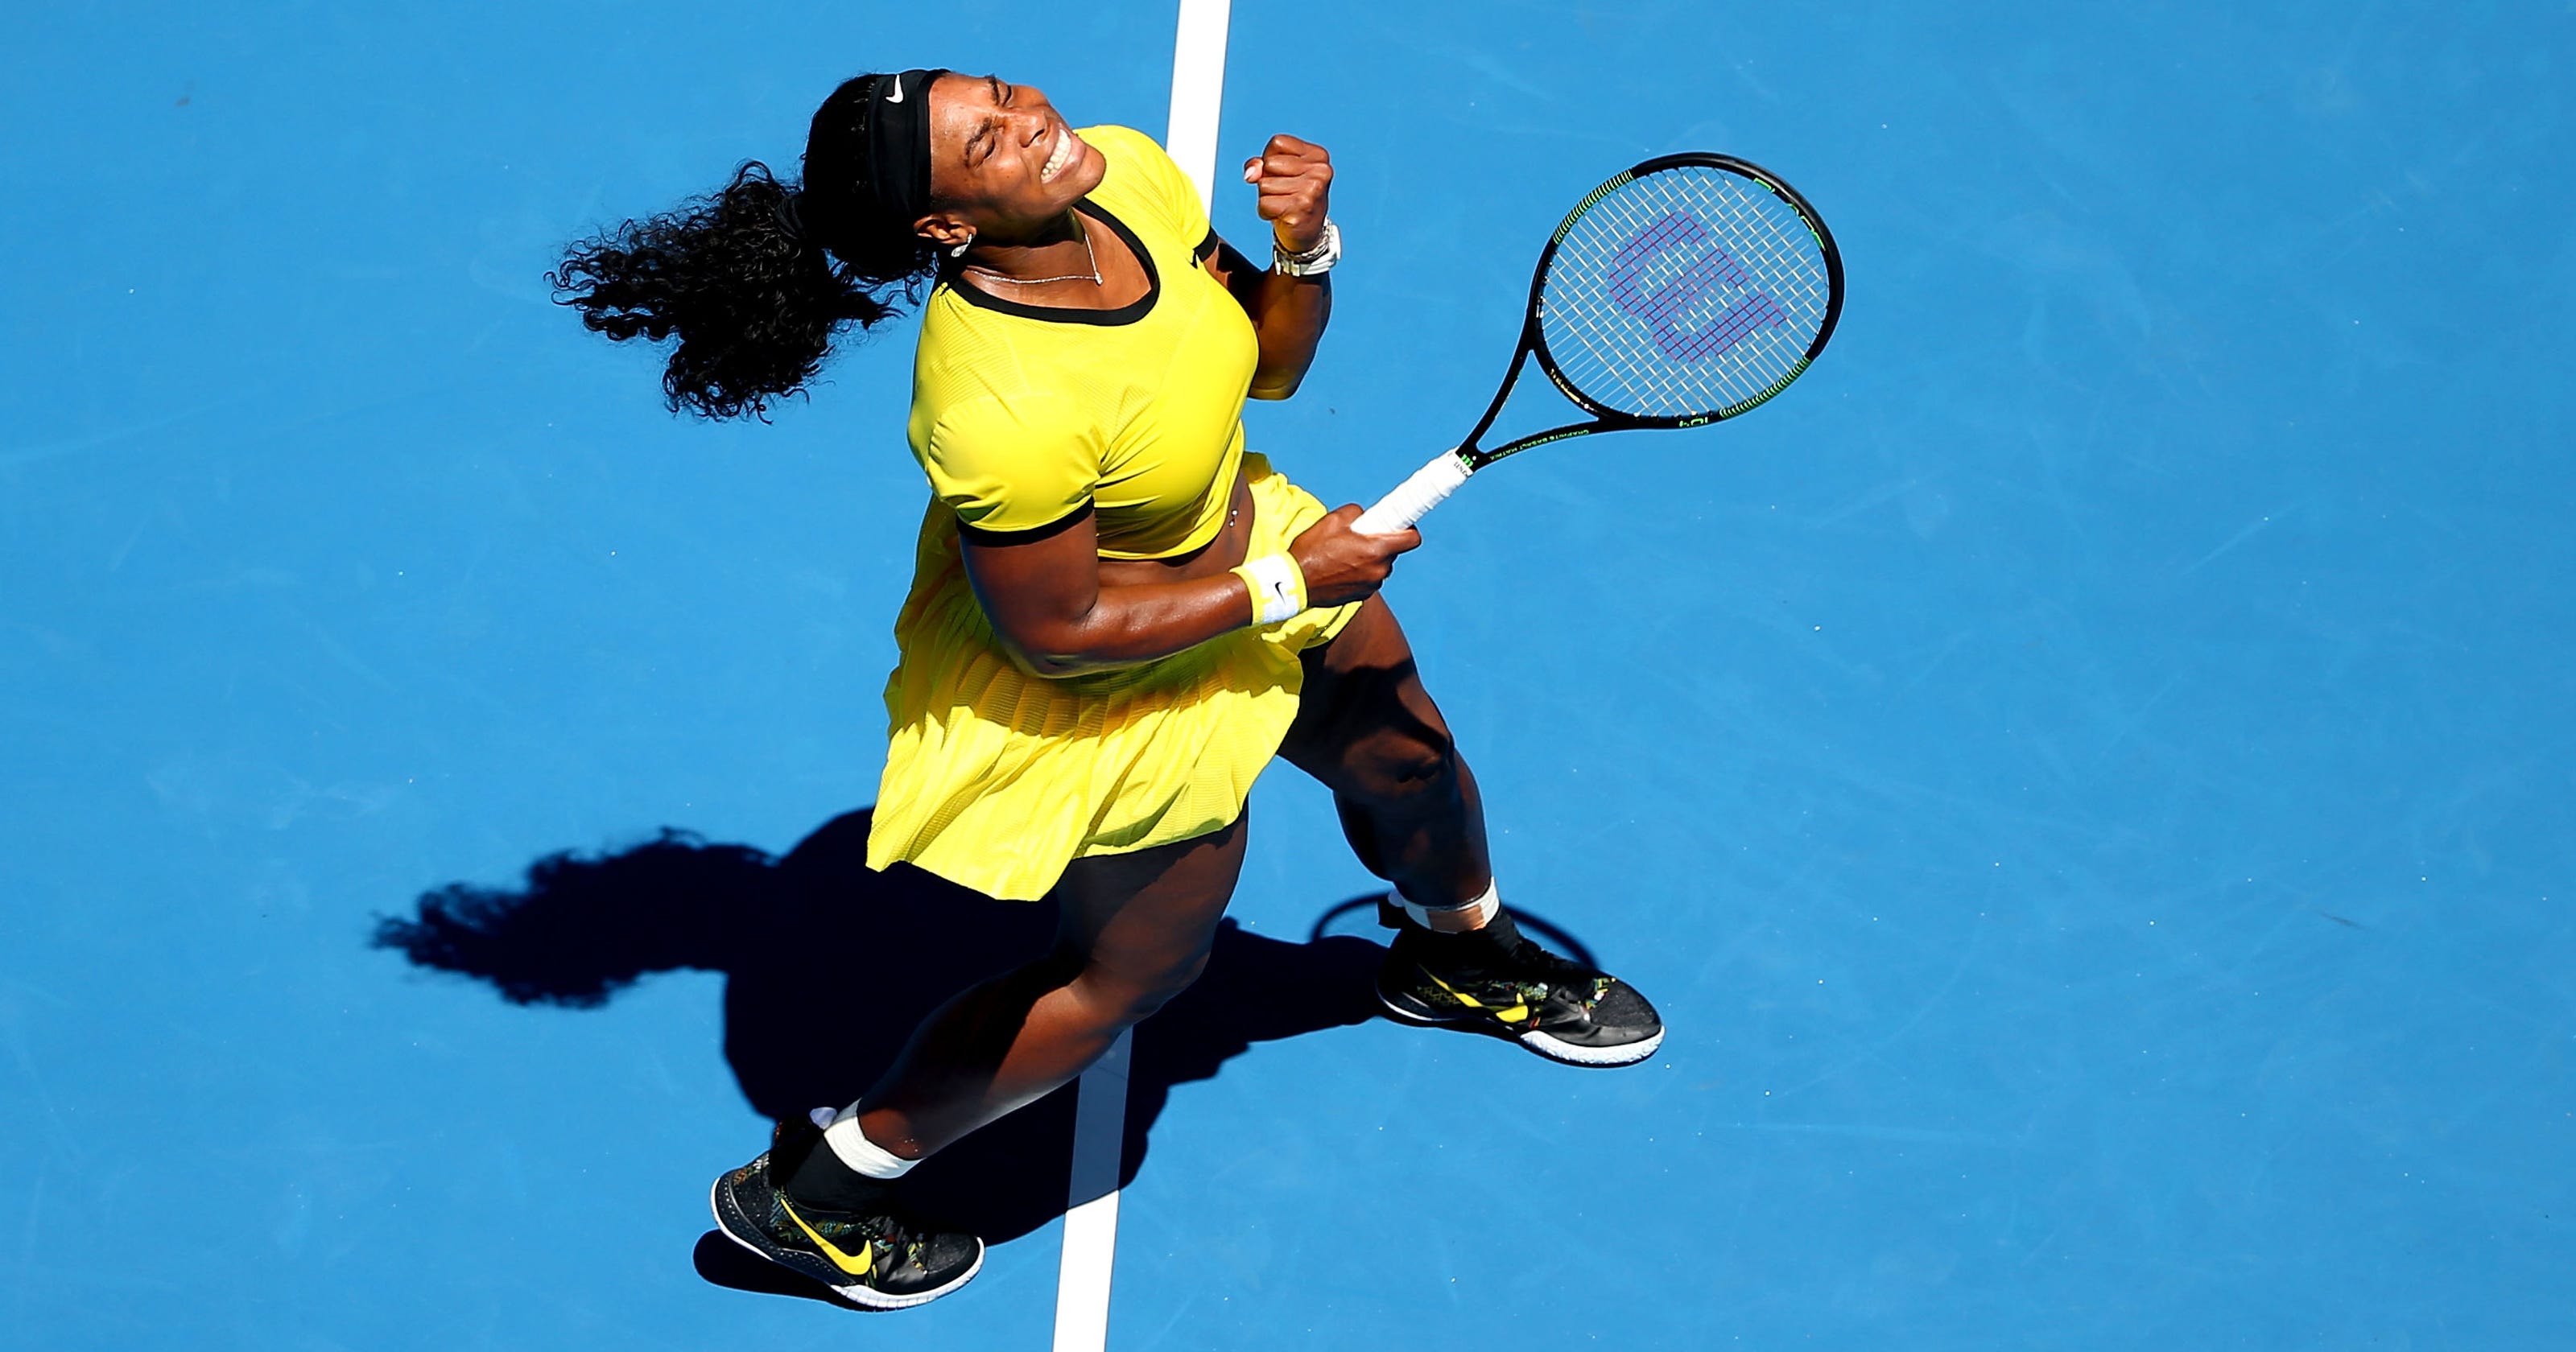 Serena Williams earns first victory in months at Australian Open3200 x 1680